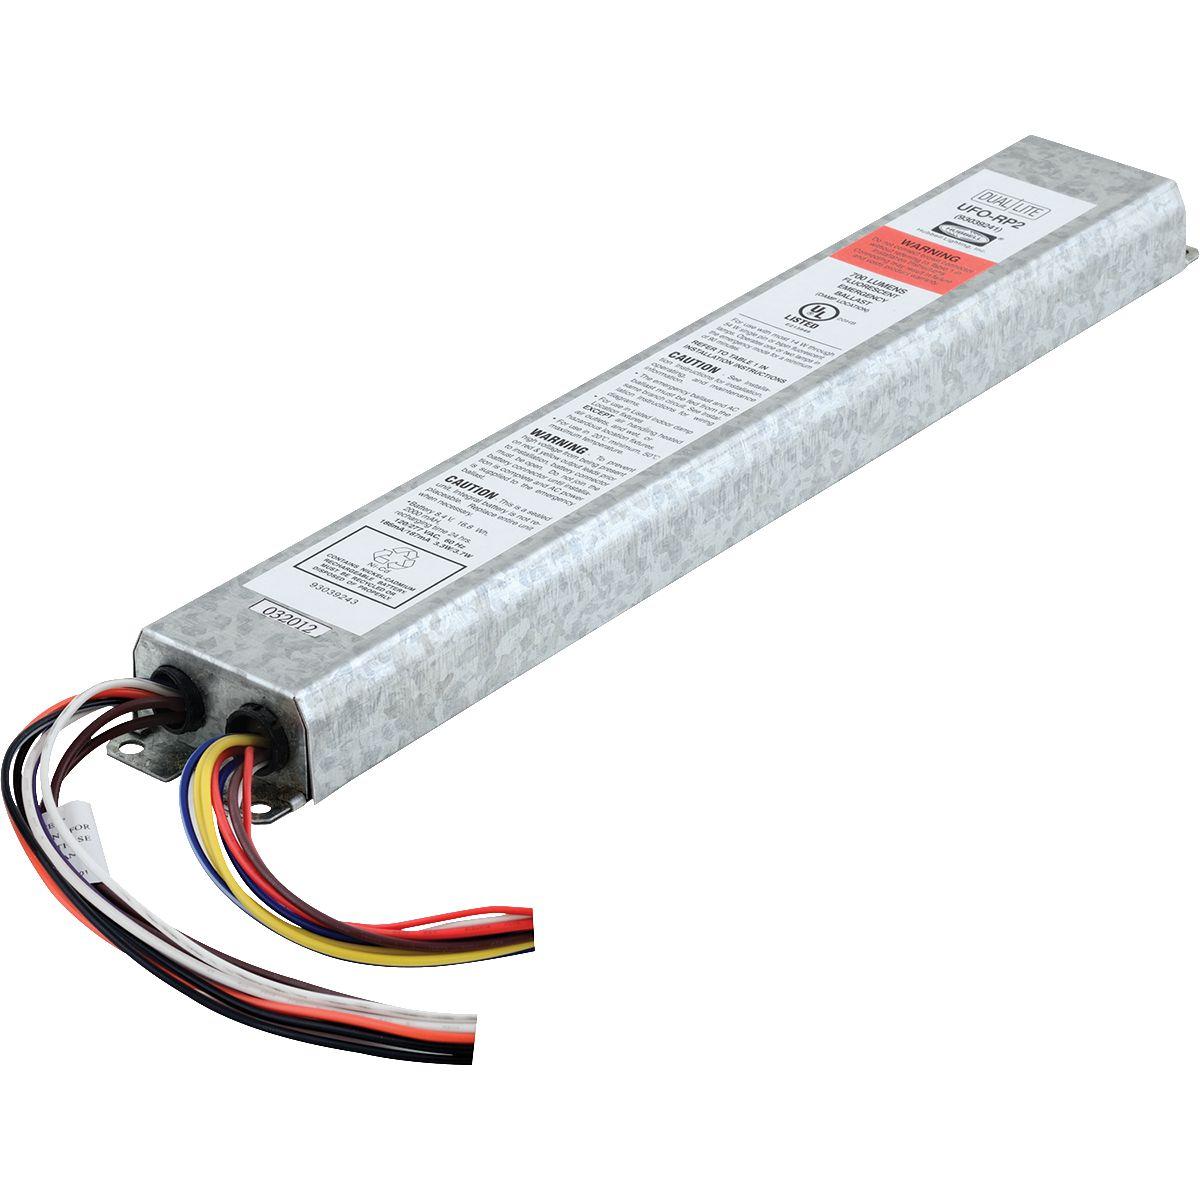 Hubbell UFO-RP2 Reduced Profile Emergency Battery Pack - Fluorescent, Lamp Type: Fluorescent, Lamp Wattage: 3.5 W, Lumen Range: 700 lm, N/A, Battery Type: Nickel Cadmium (maintenance free), Temperature Range: 20°C-55°C, Damp Location, Gray, 120/277 VAC.  ; Reduced Profil